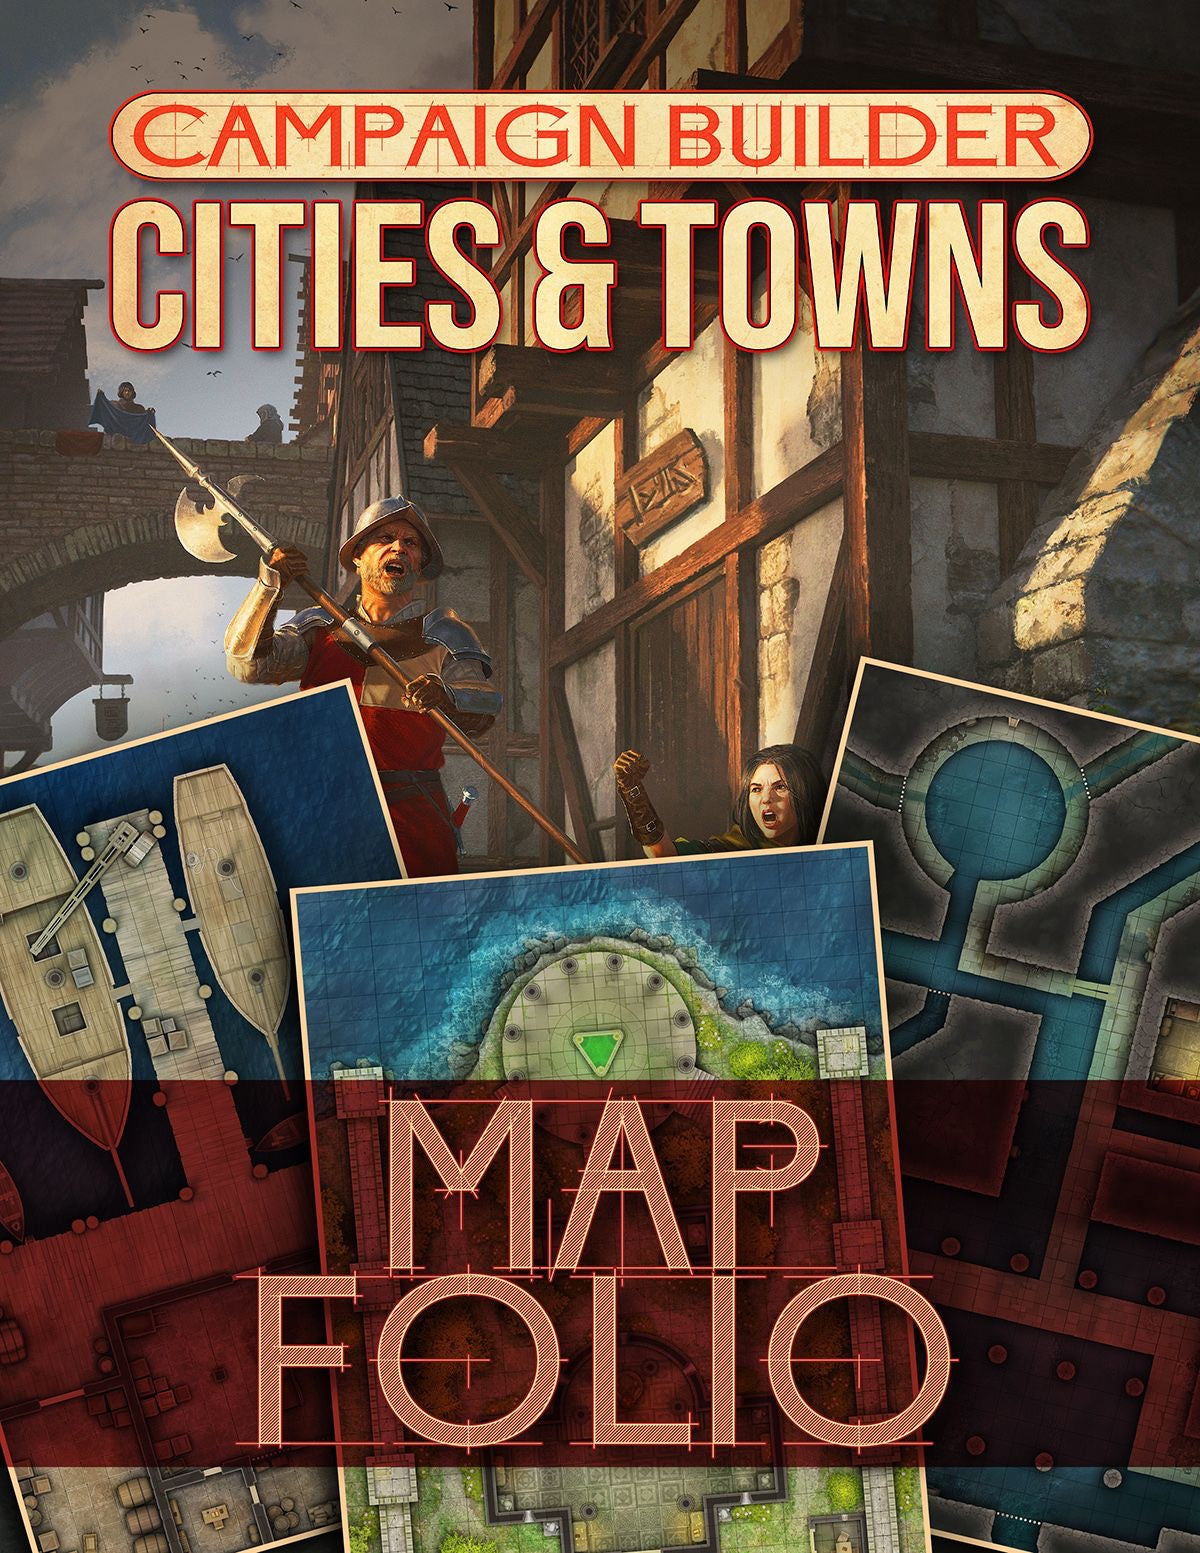 Campaign Builder: Cities and Towns - Map Folio